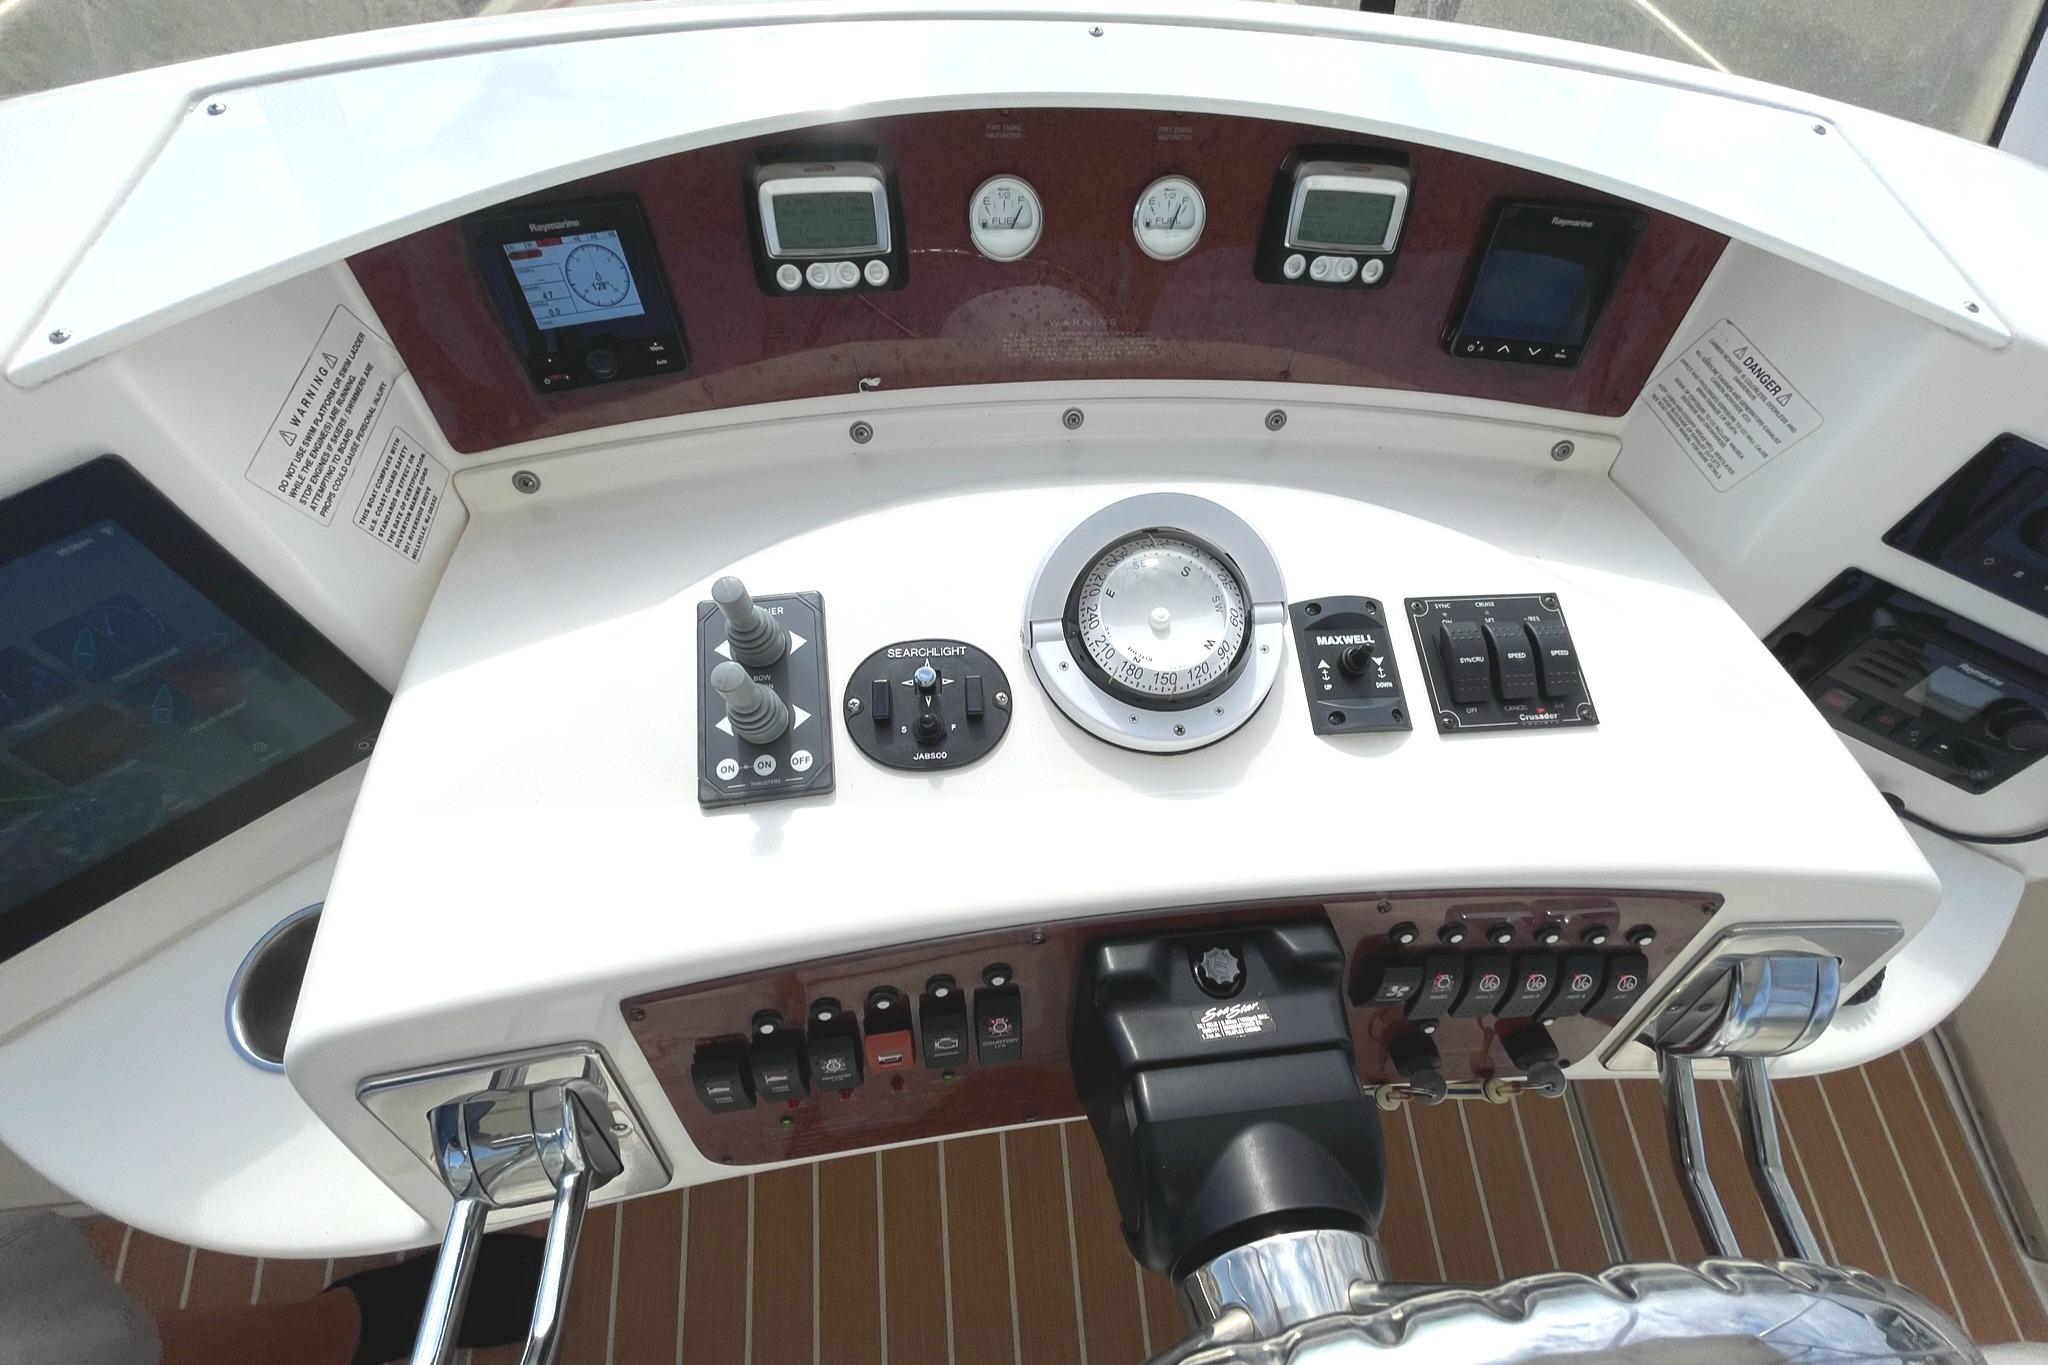 HELM W/ALL NEW GUAGES, SWITCHES, ELECTRONICS, CRUSADER ENGINE GAUGES, BOW & STERN THRUSTER CONTROLS, COMPASS, ETC